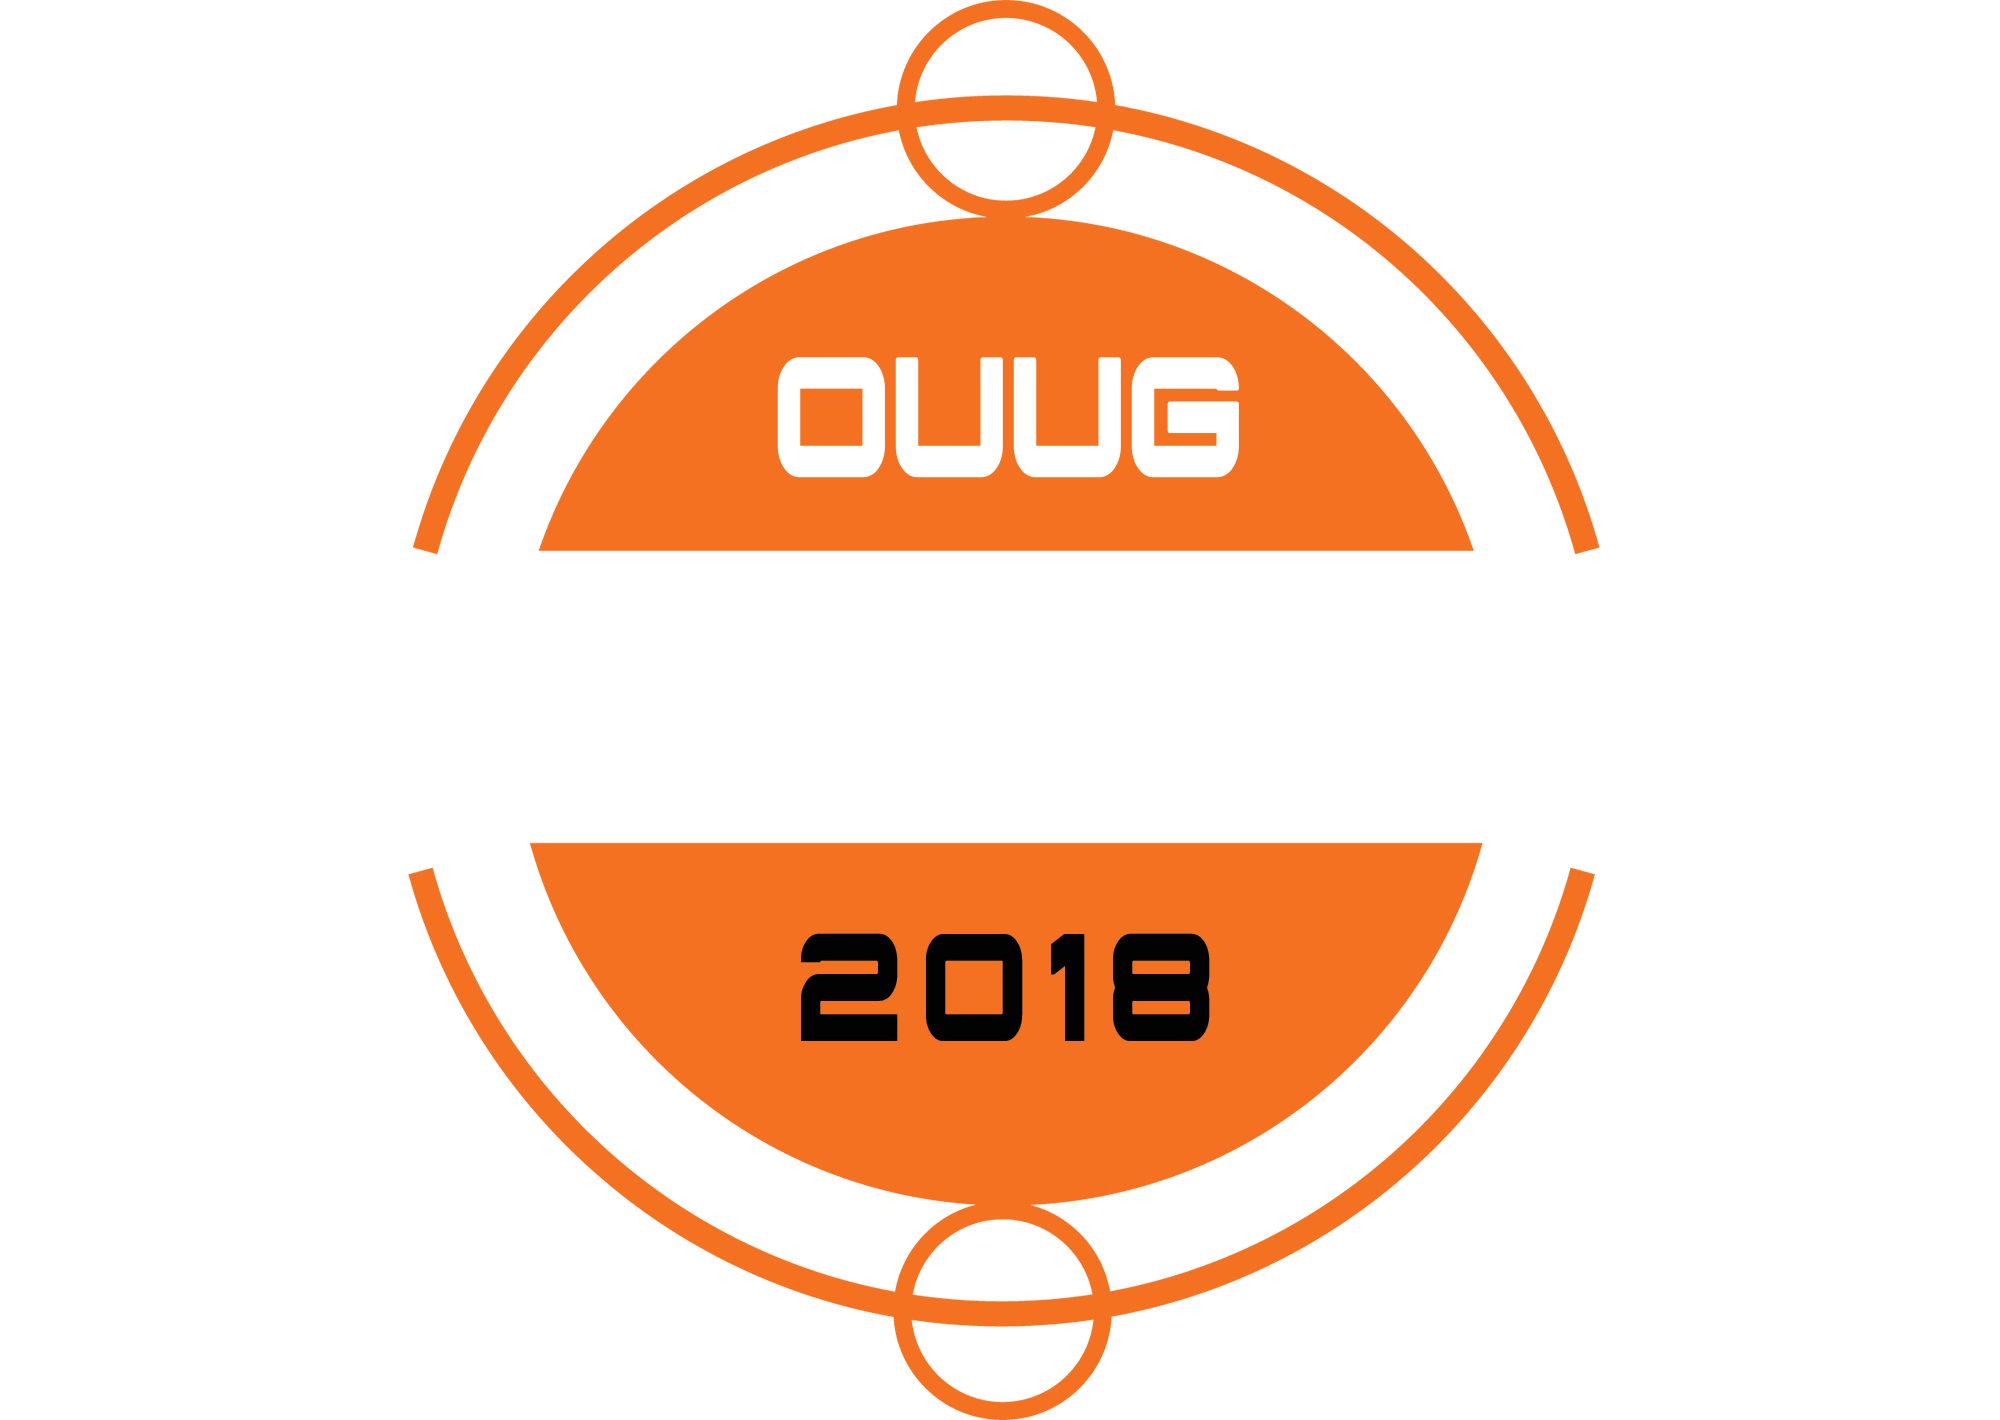 Ouug oracle utilities users. Conference clipart focus group